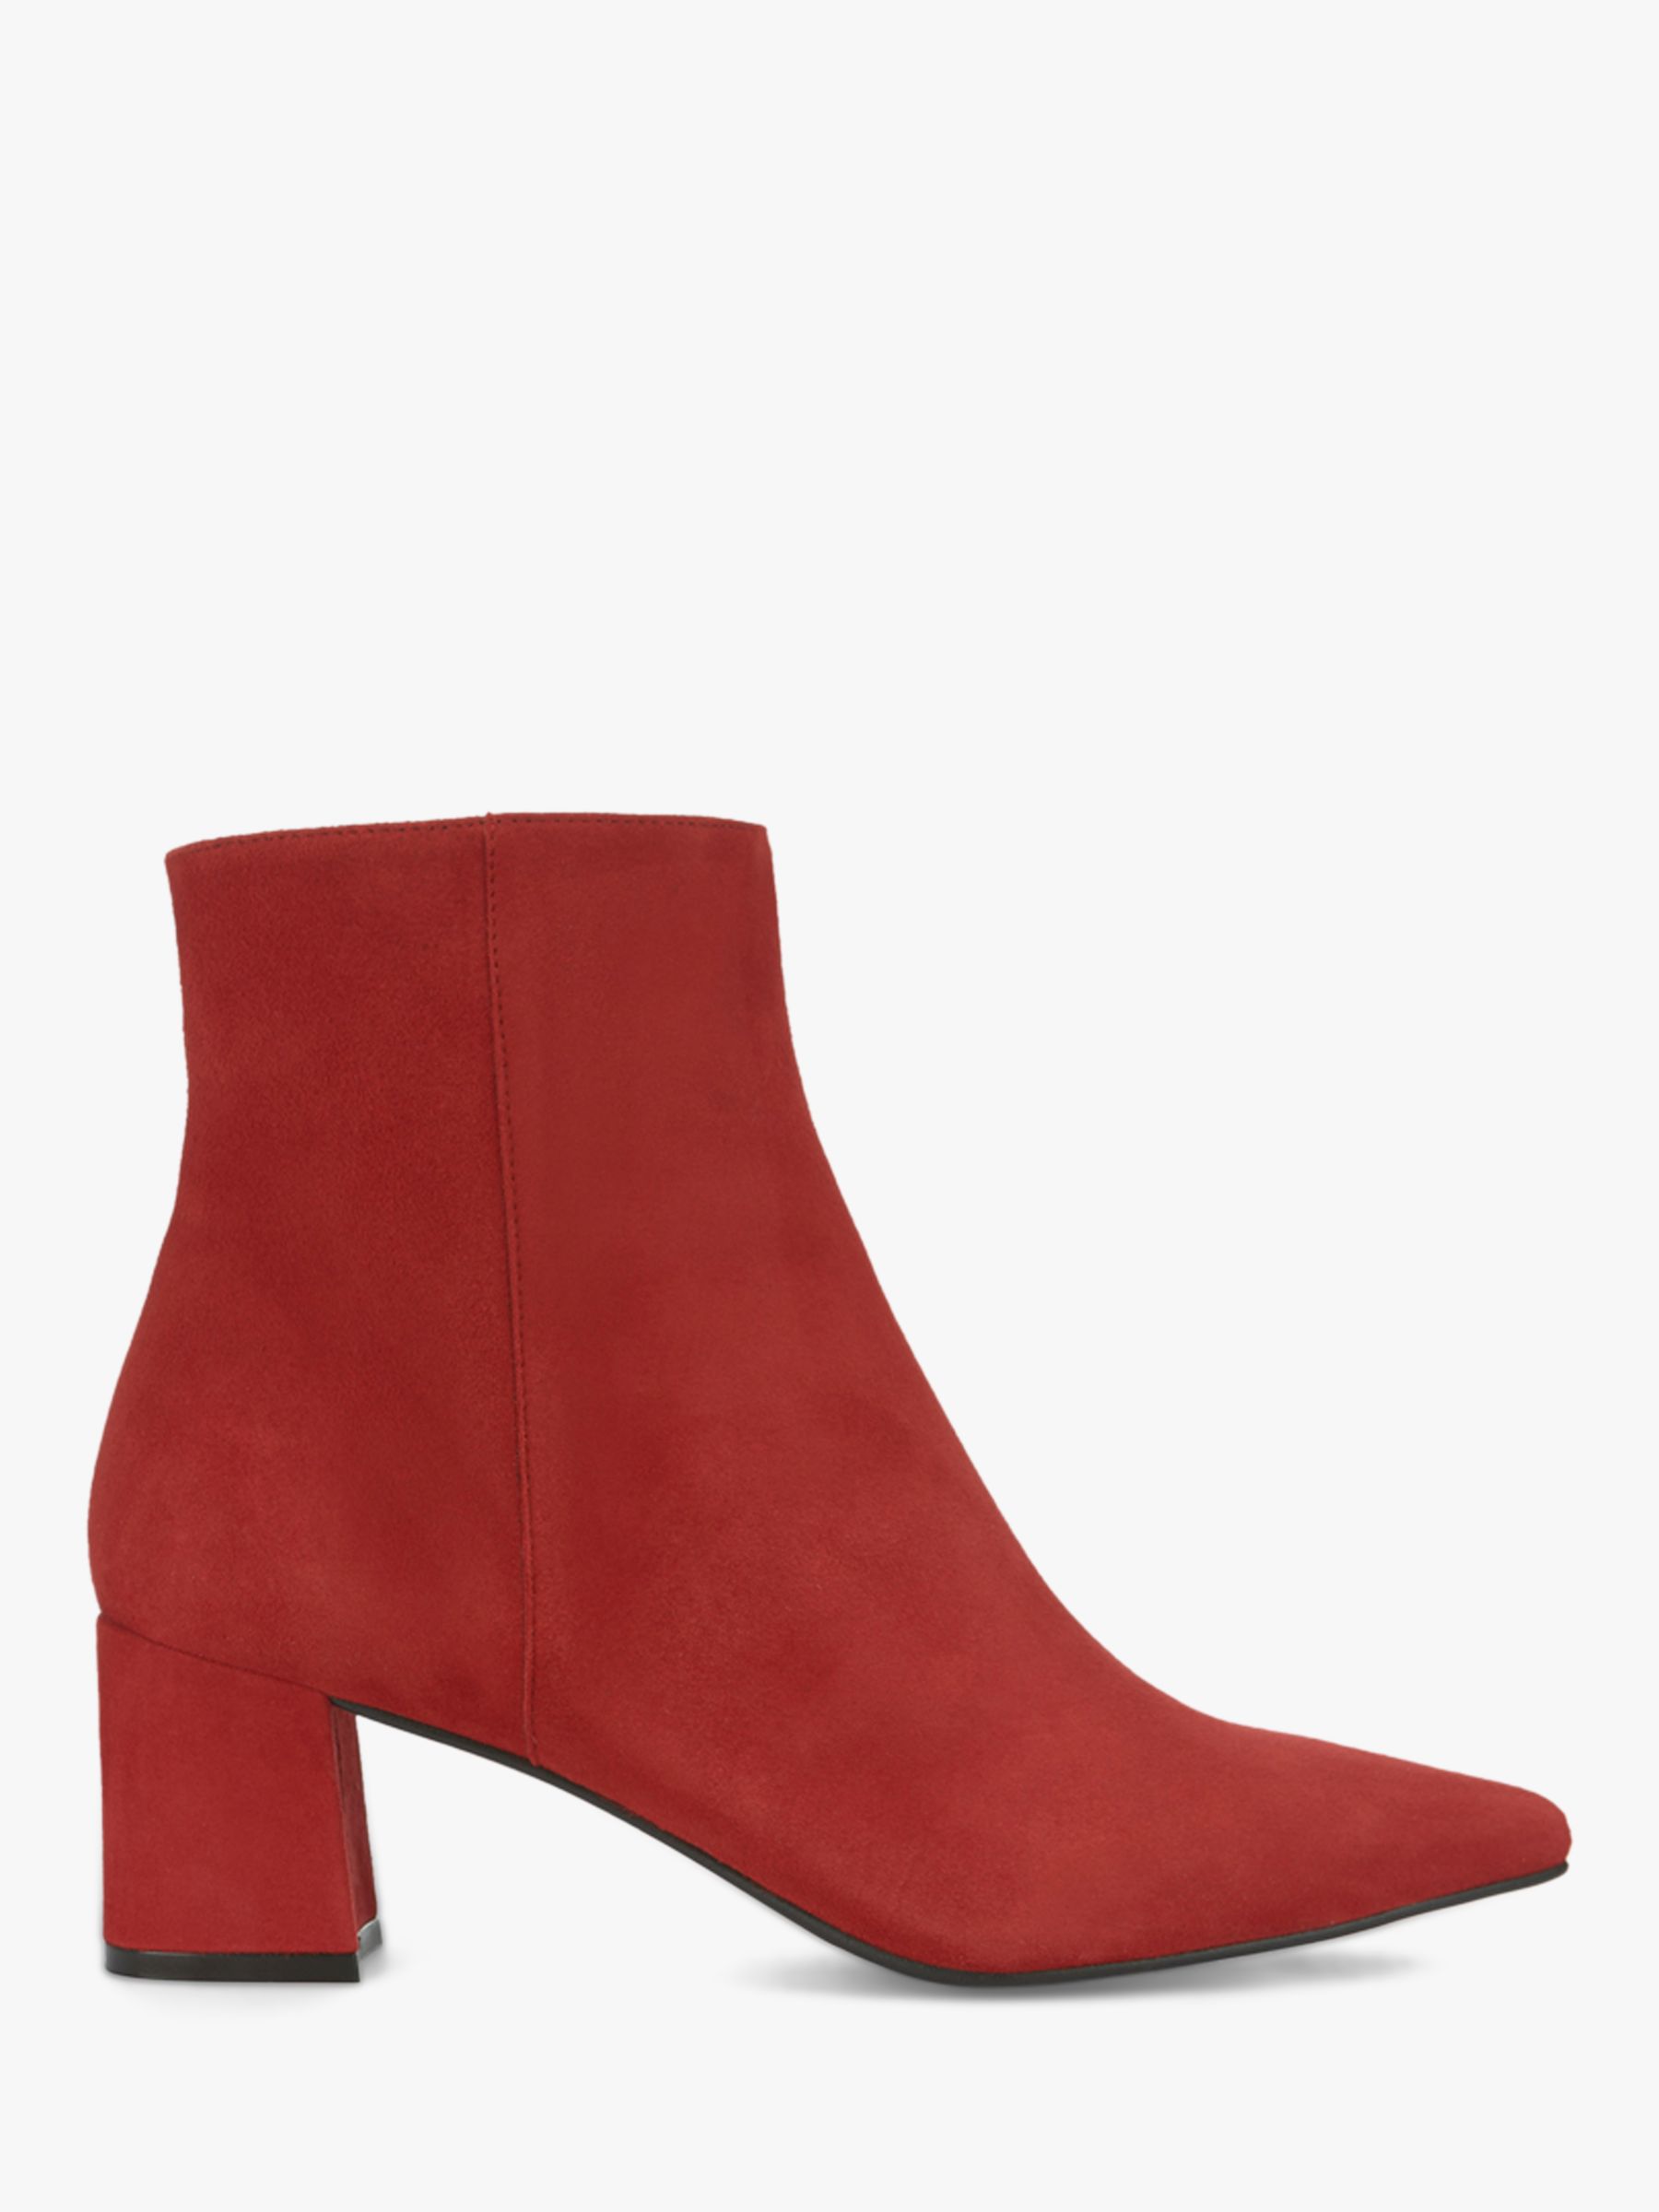 Mint Velvet Olivia Suede Ankle Boots, Red at John Lewis & Partners